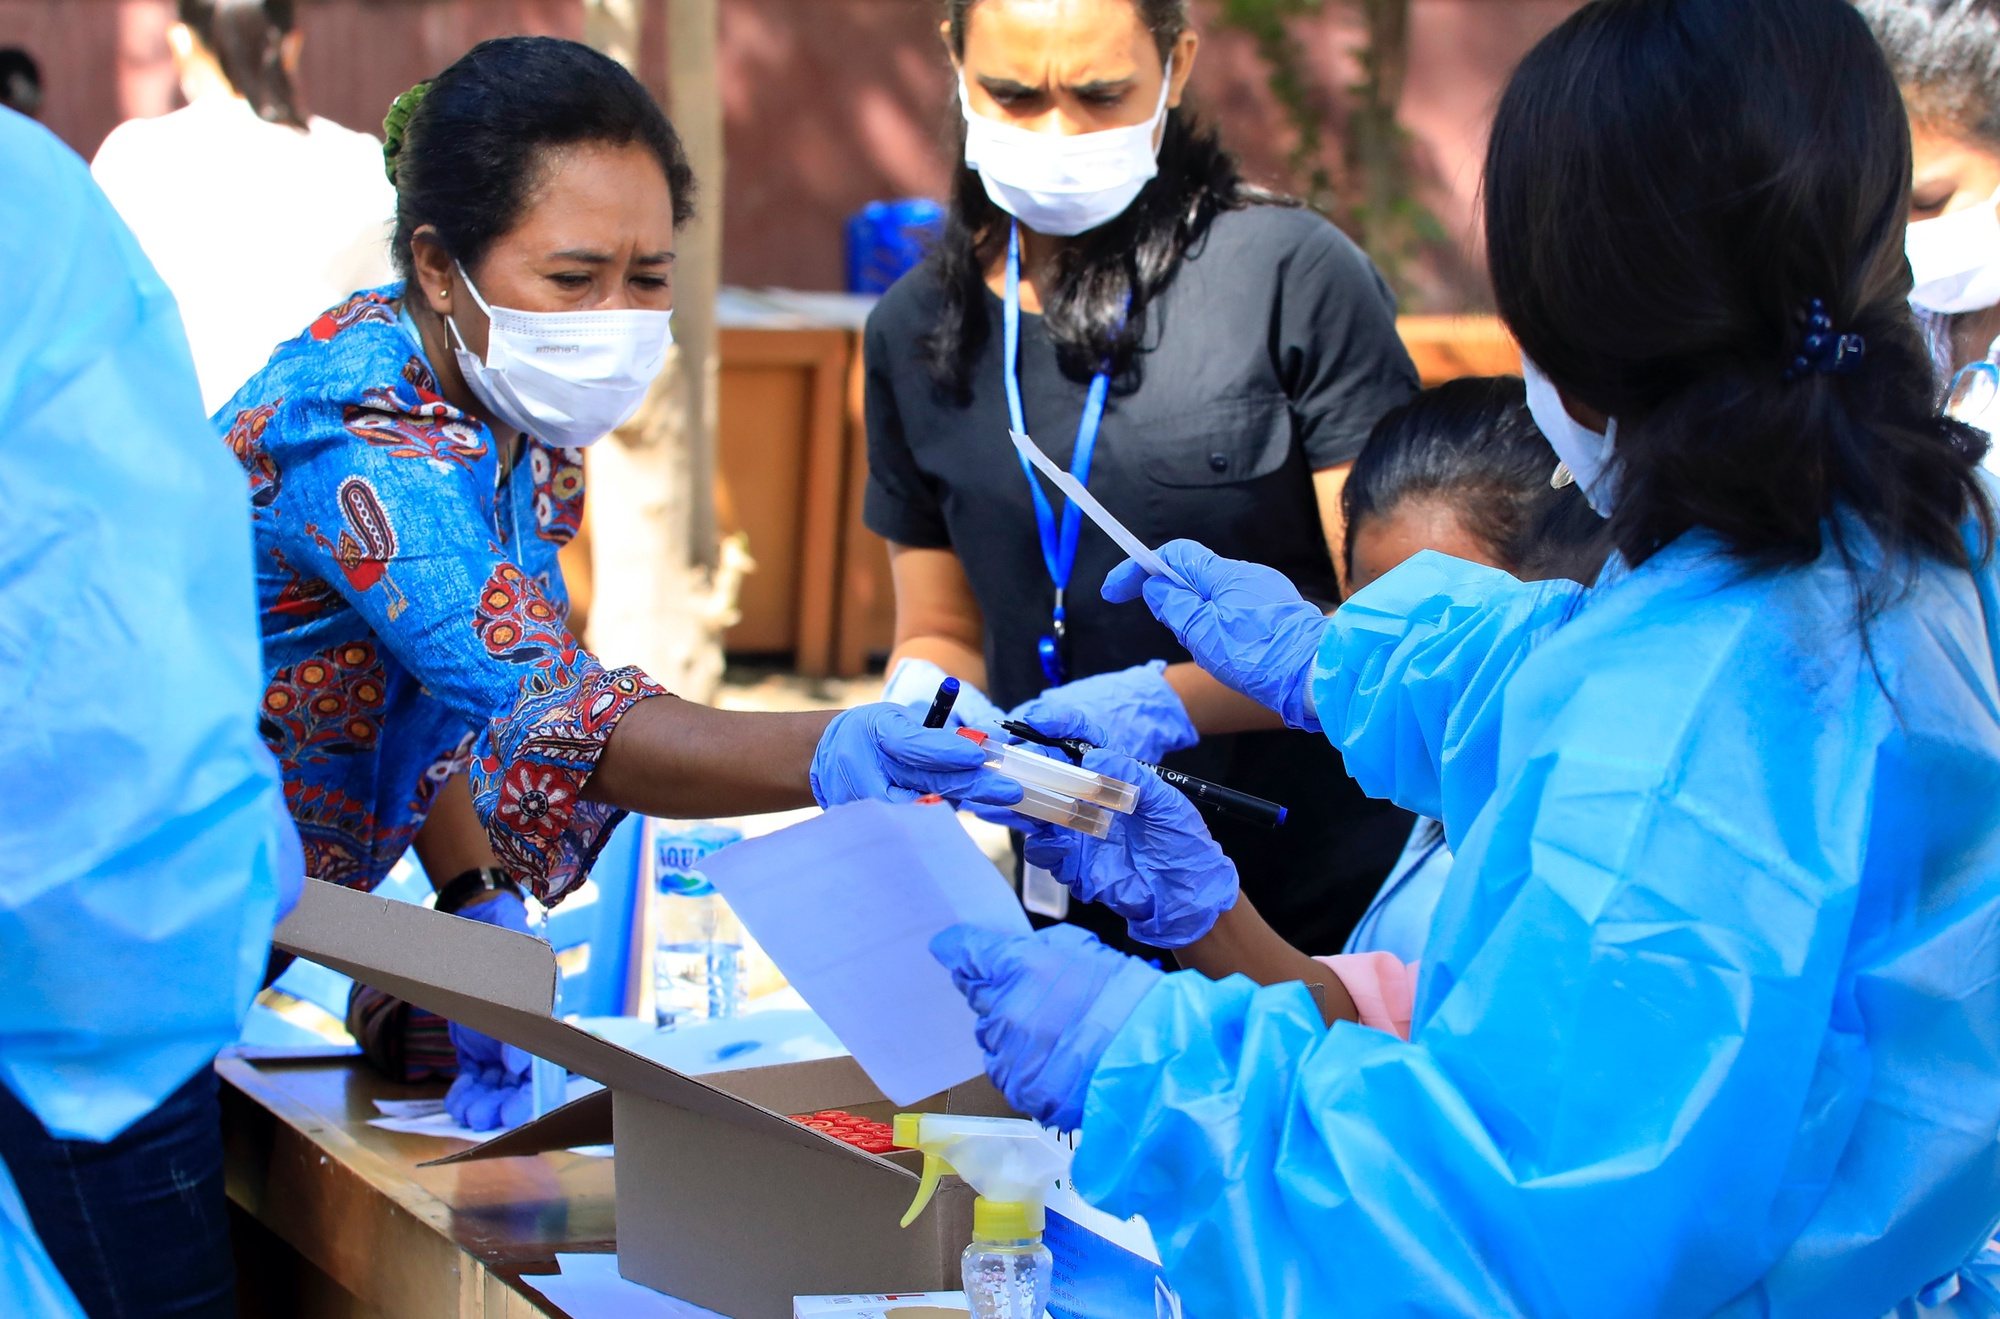 epa09368978 Health workers prepare to collect specimen samples from residents during a COVID-19 swab testing in Dili, East Timor, known also as Timor Leste, 27 July 2021. East Timor has recorded more than 10,000 coronavirus disease (COVID-19) cases since the beginning of the pandemic.  EPA/ANTONIO DASIPARU